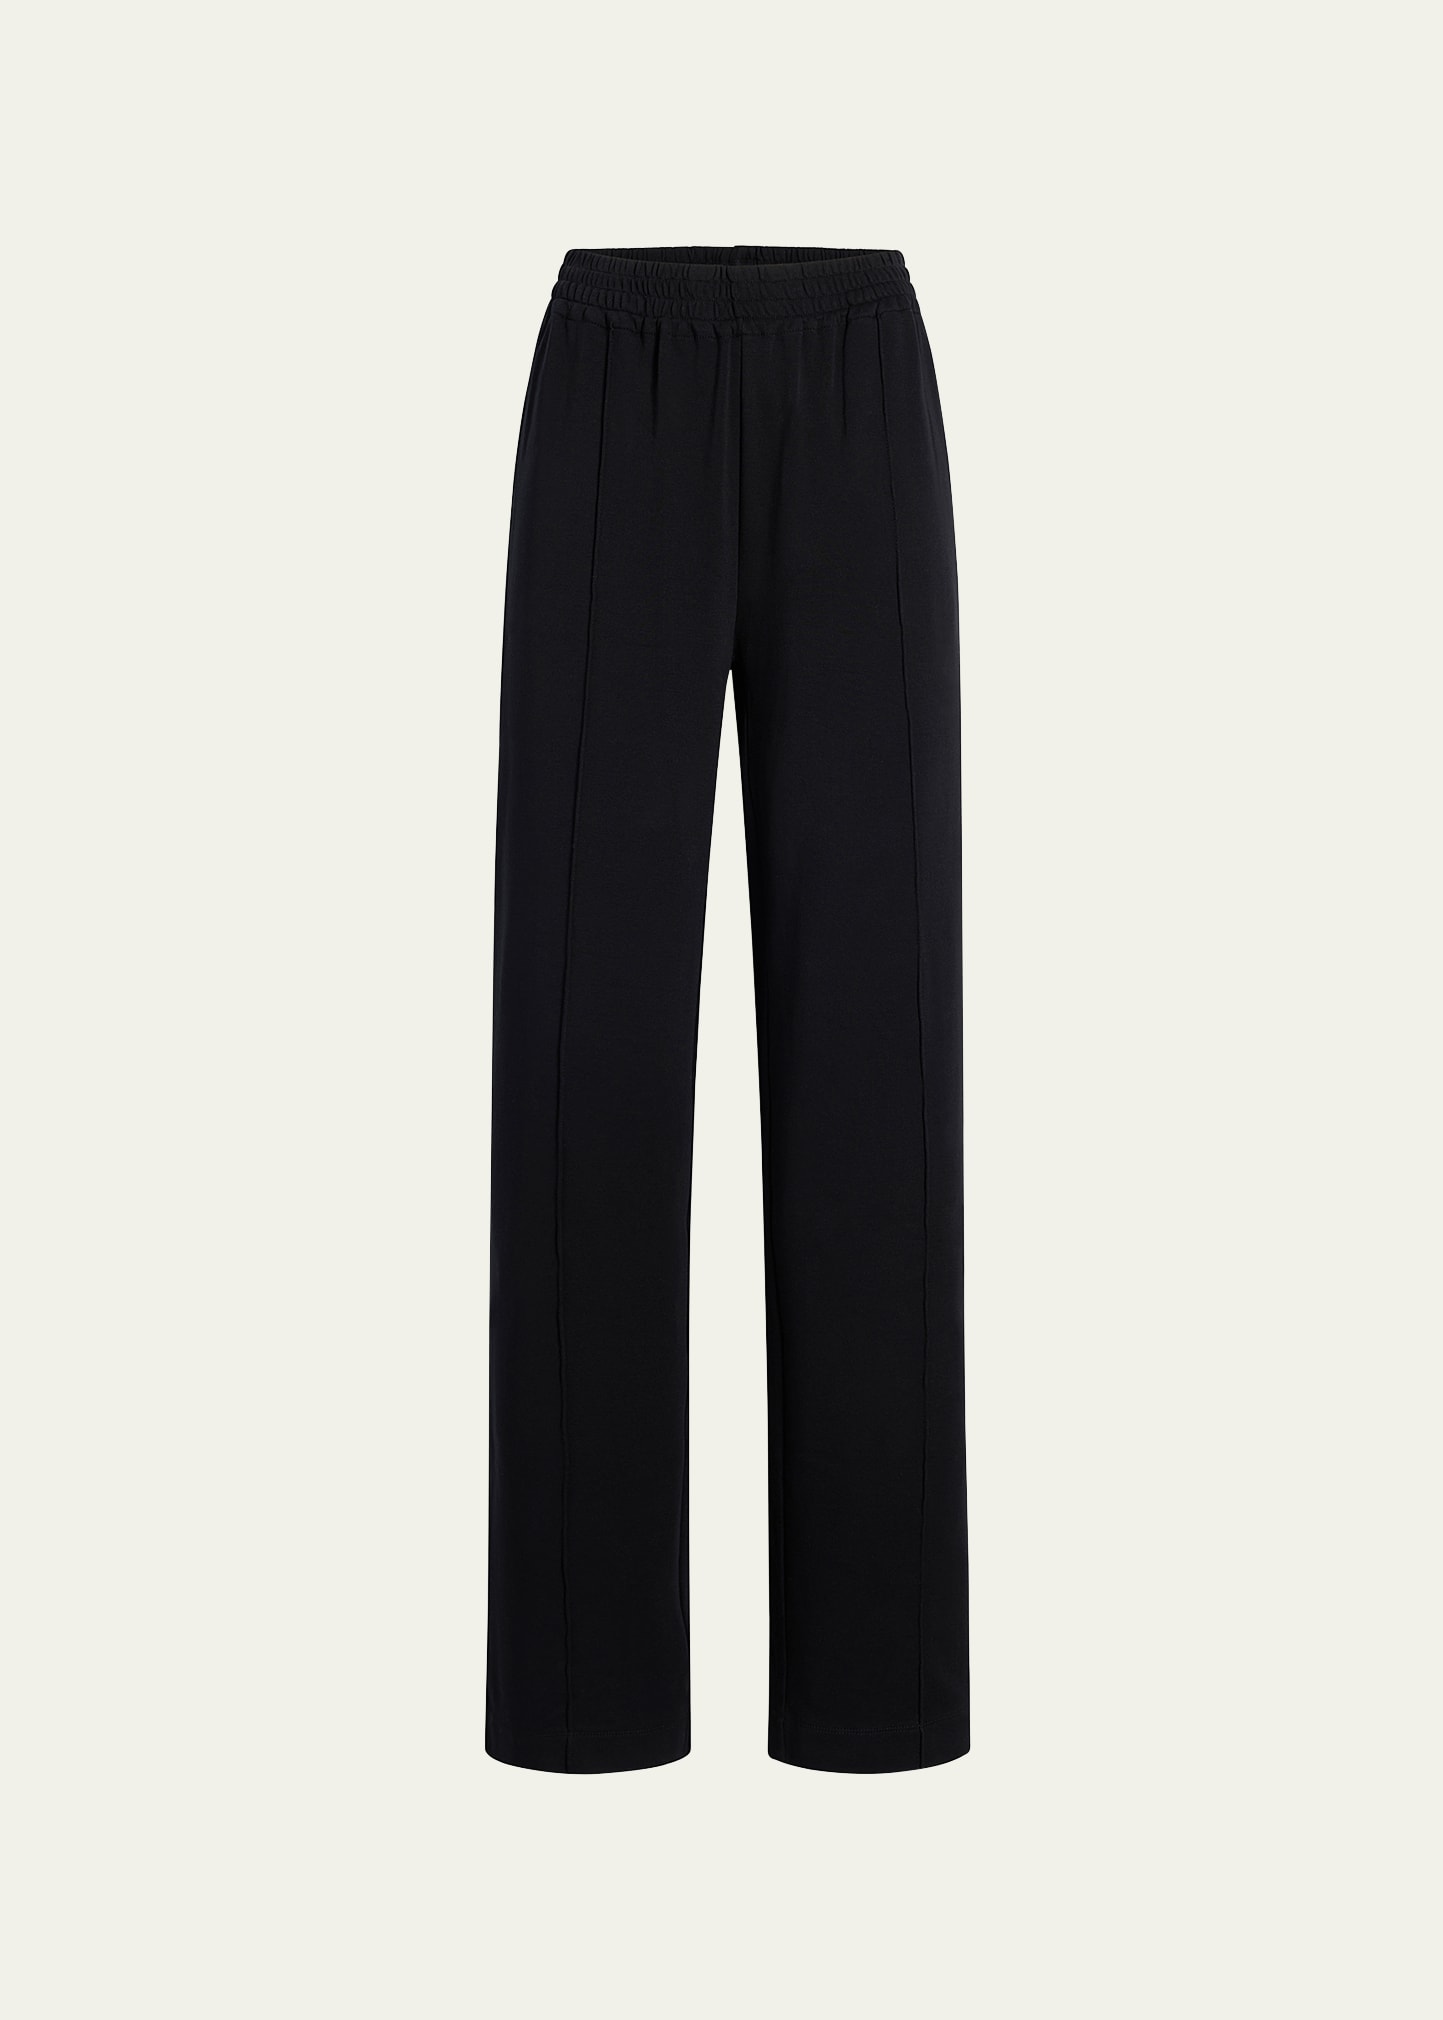 Another Tomorrow Luxe Seamed Wide-Leg Lounge Pants